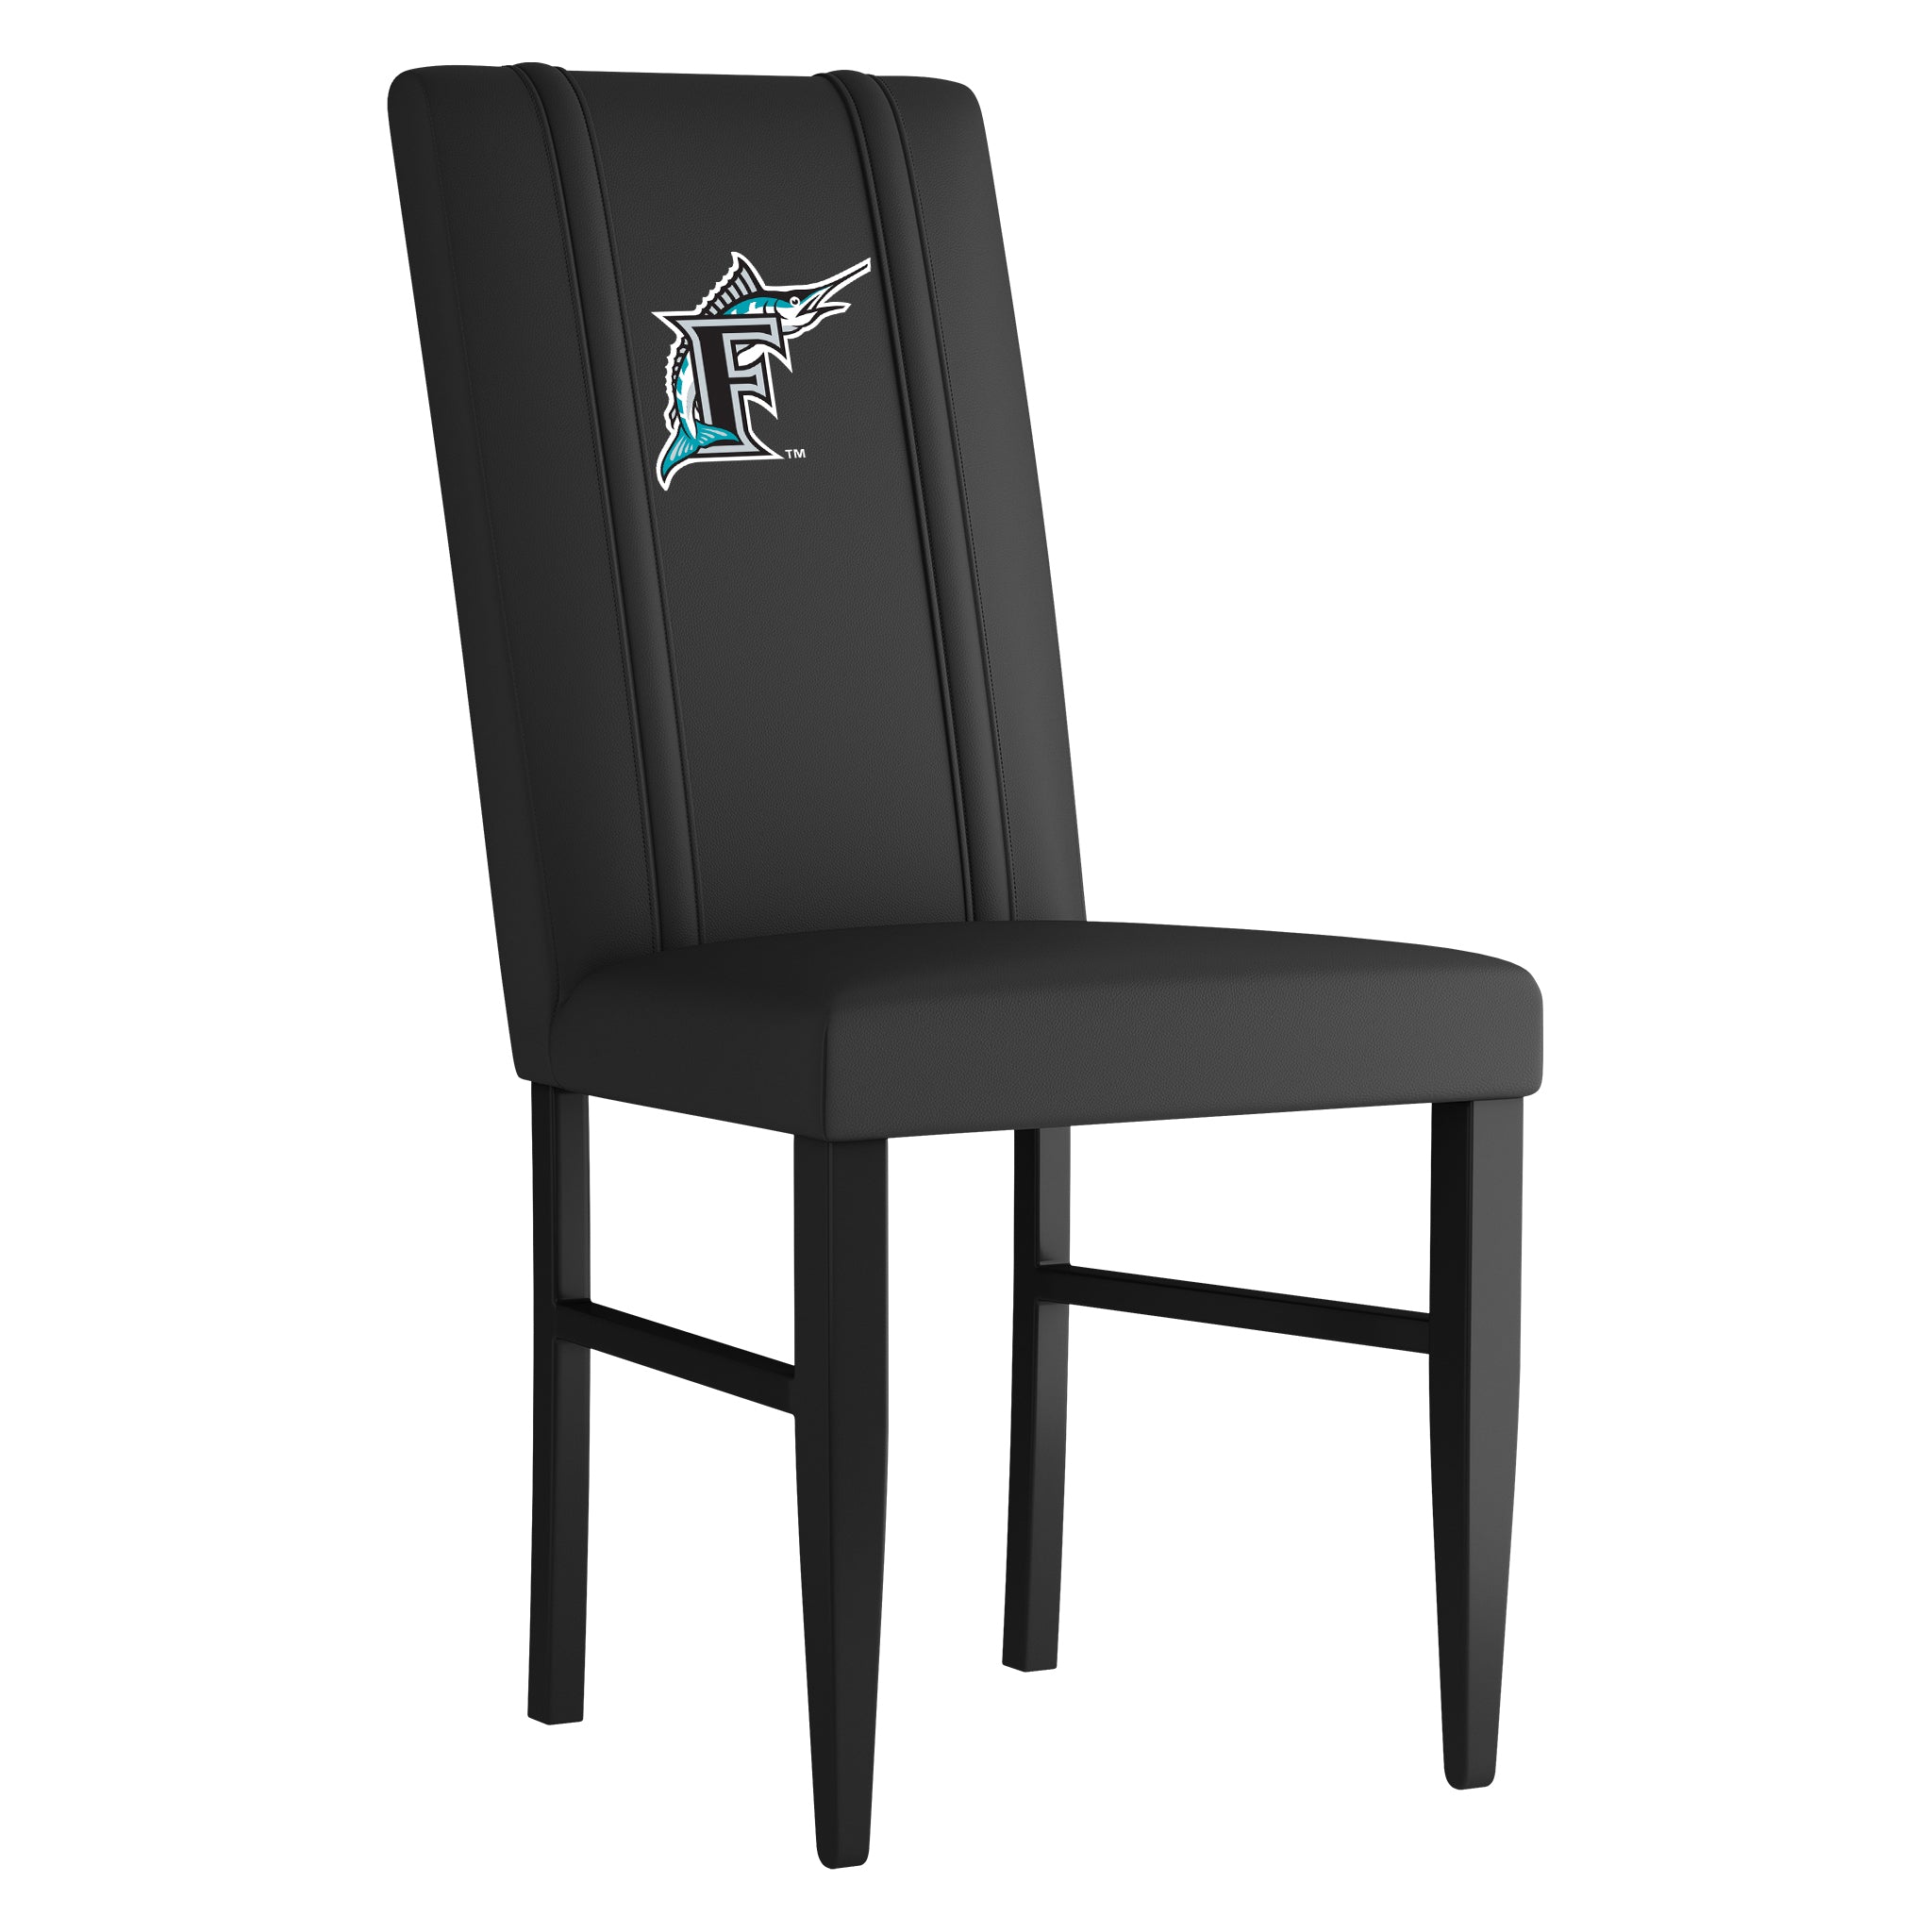 Side Chair 2000 with Florida Marlins Cooperstown Secondary Set of 2